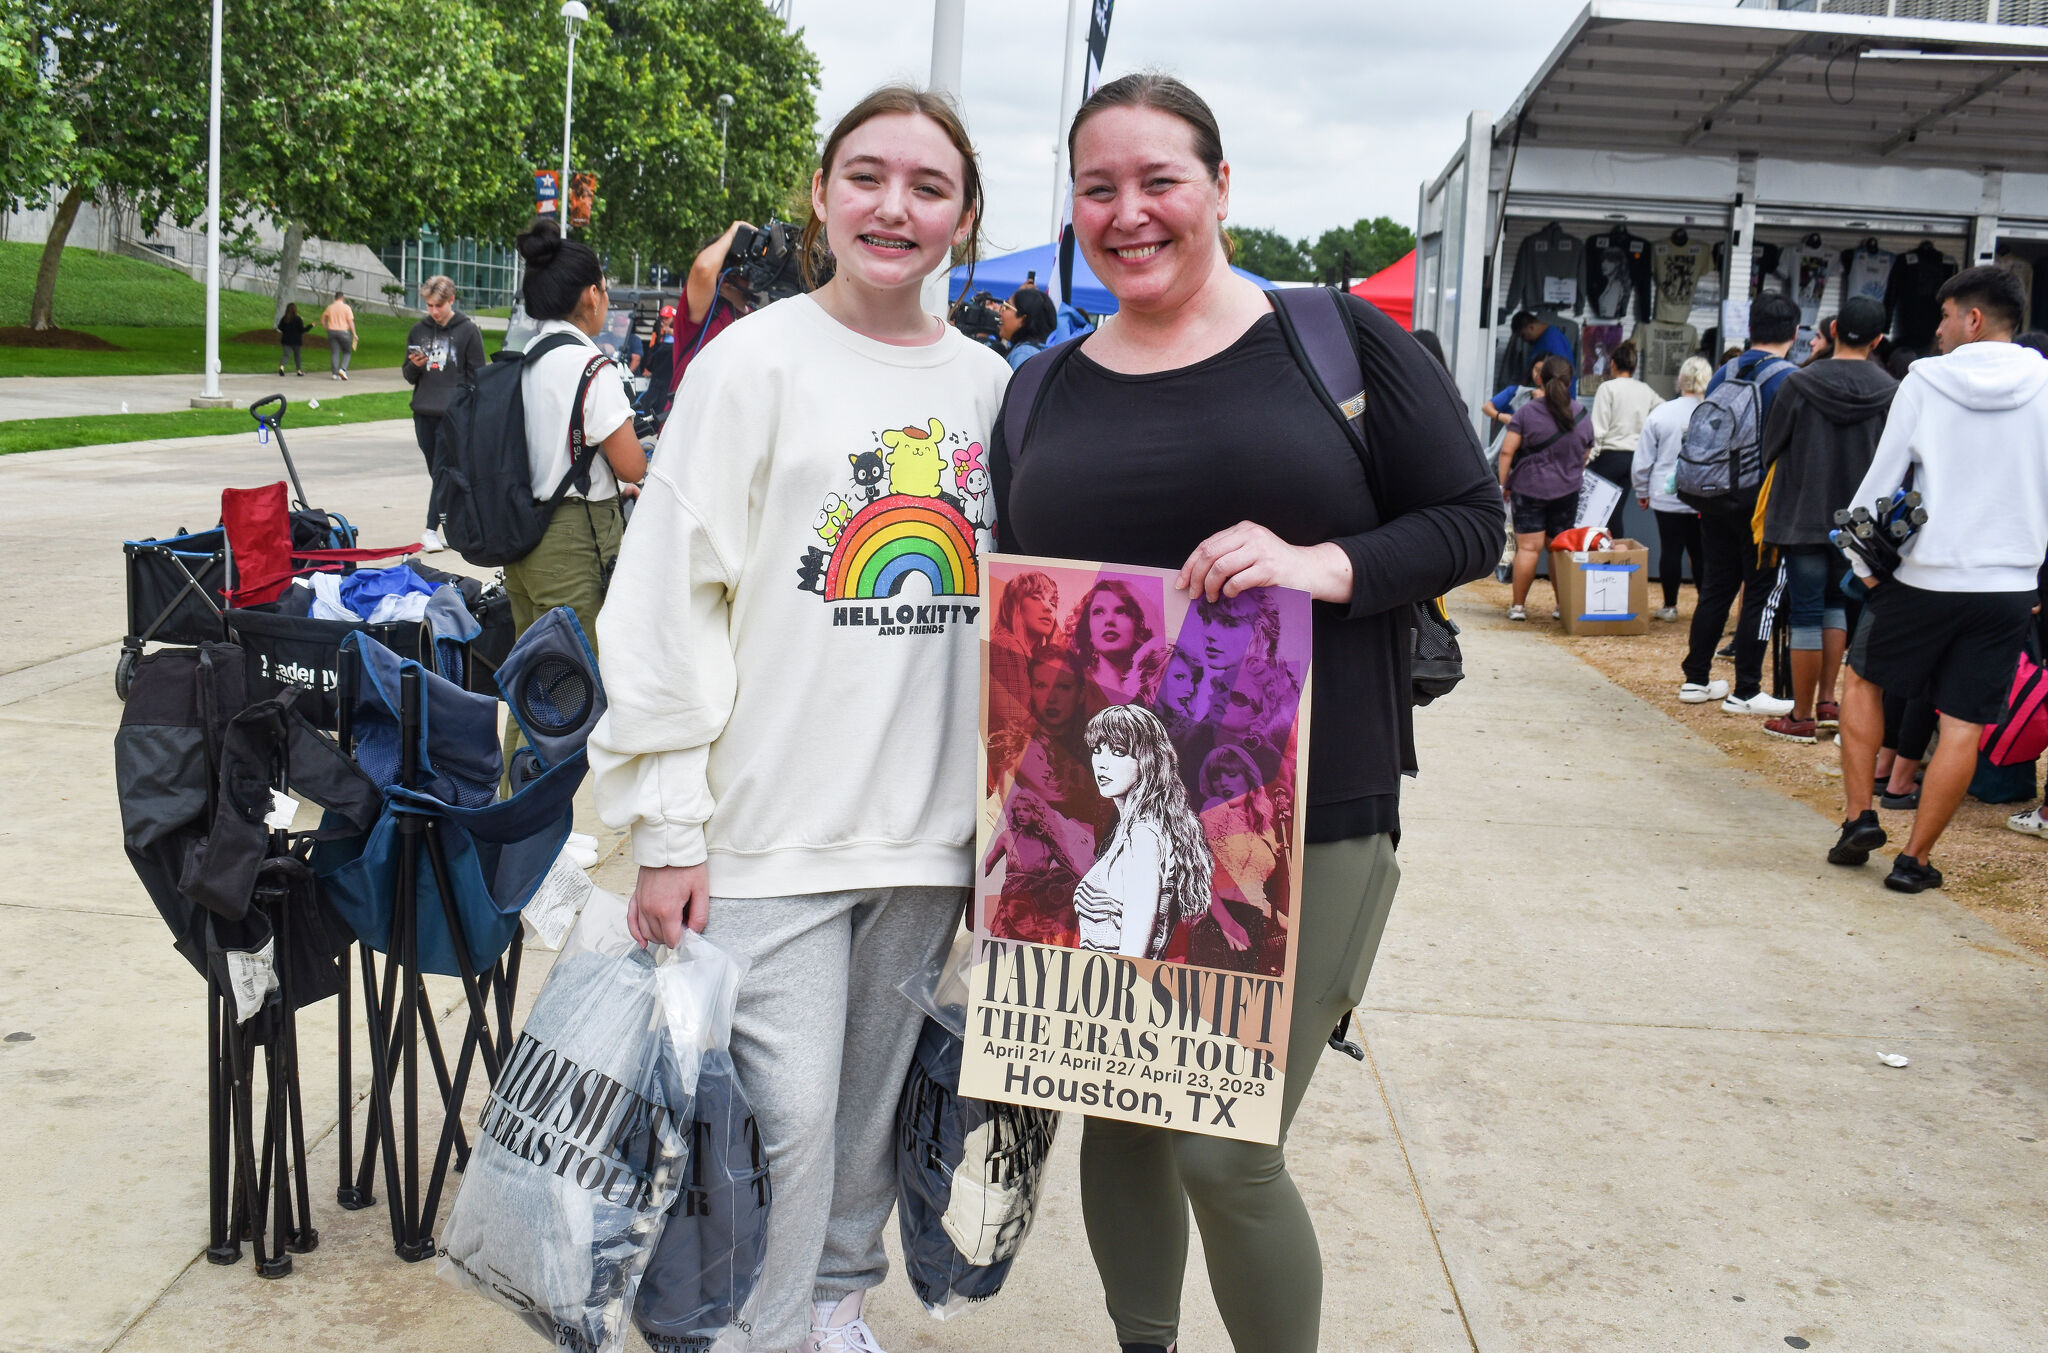 Thousands of fans line up for Houston Taylor Swift merch